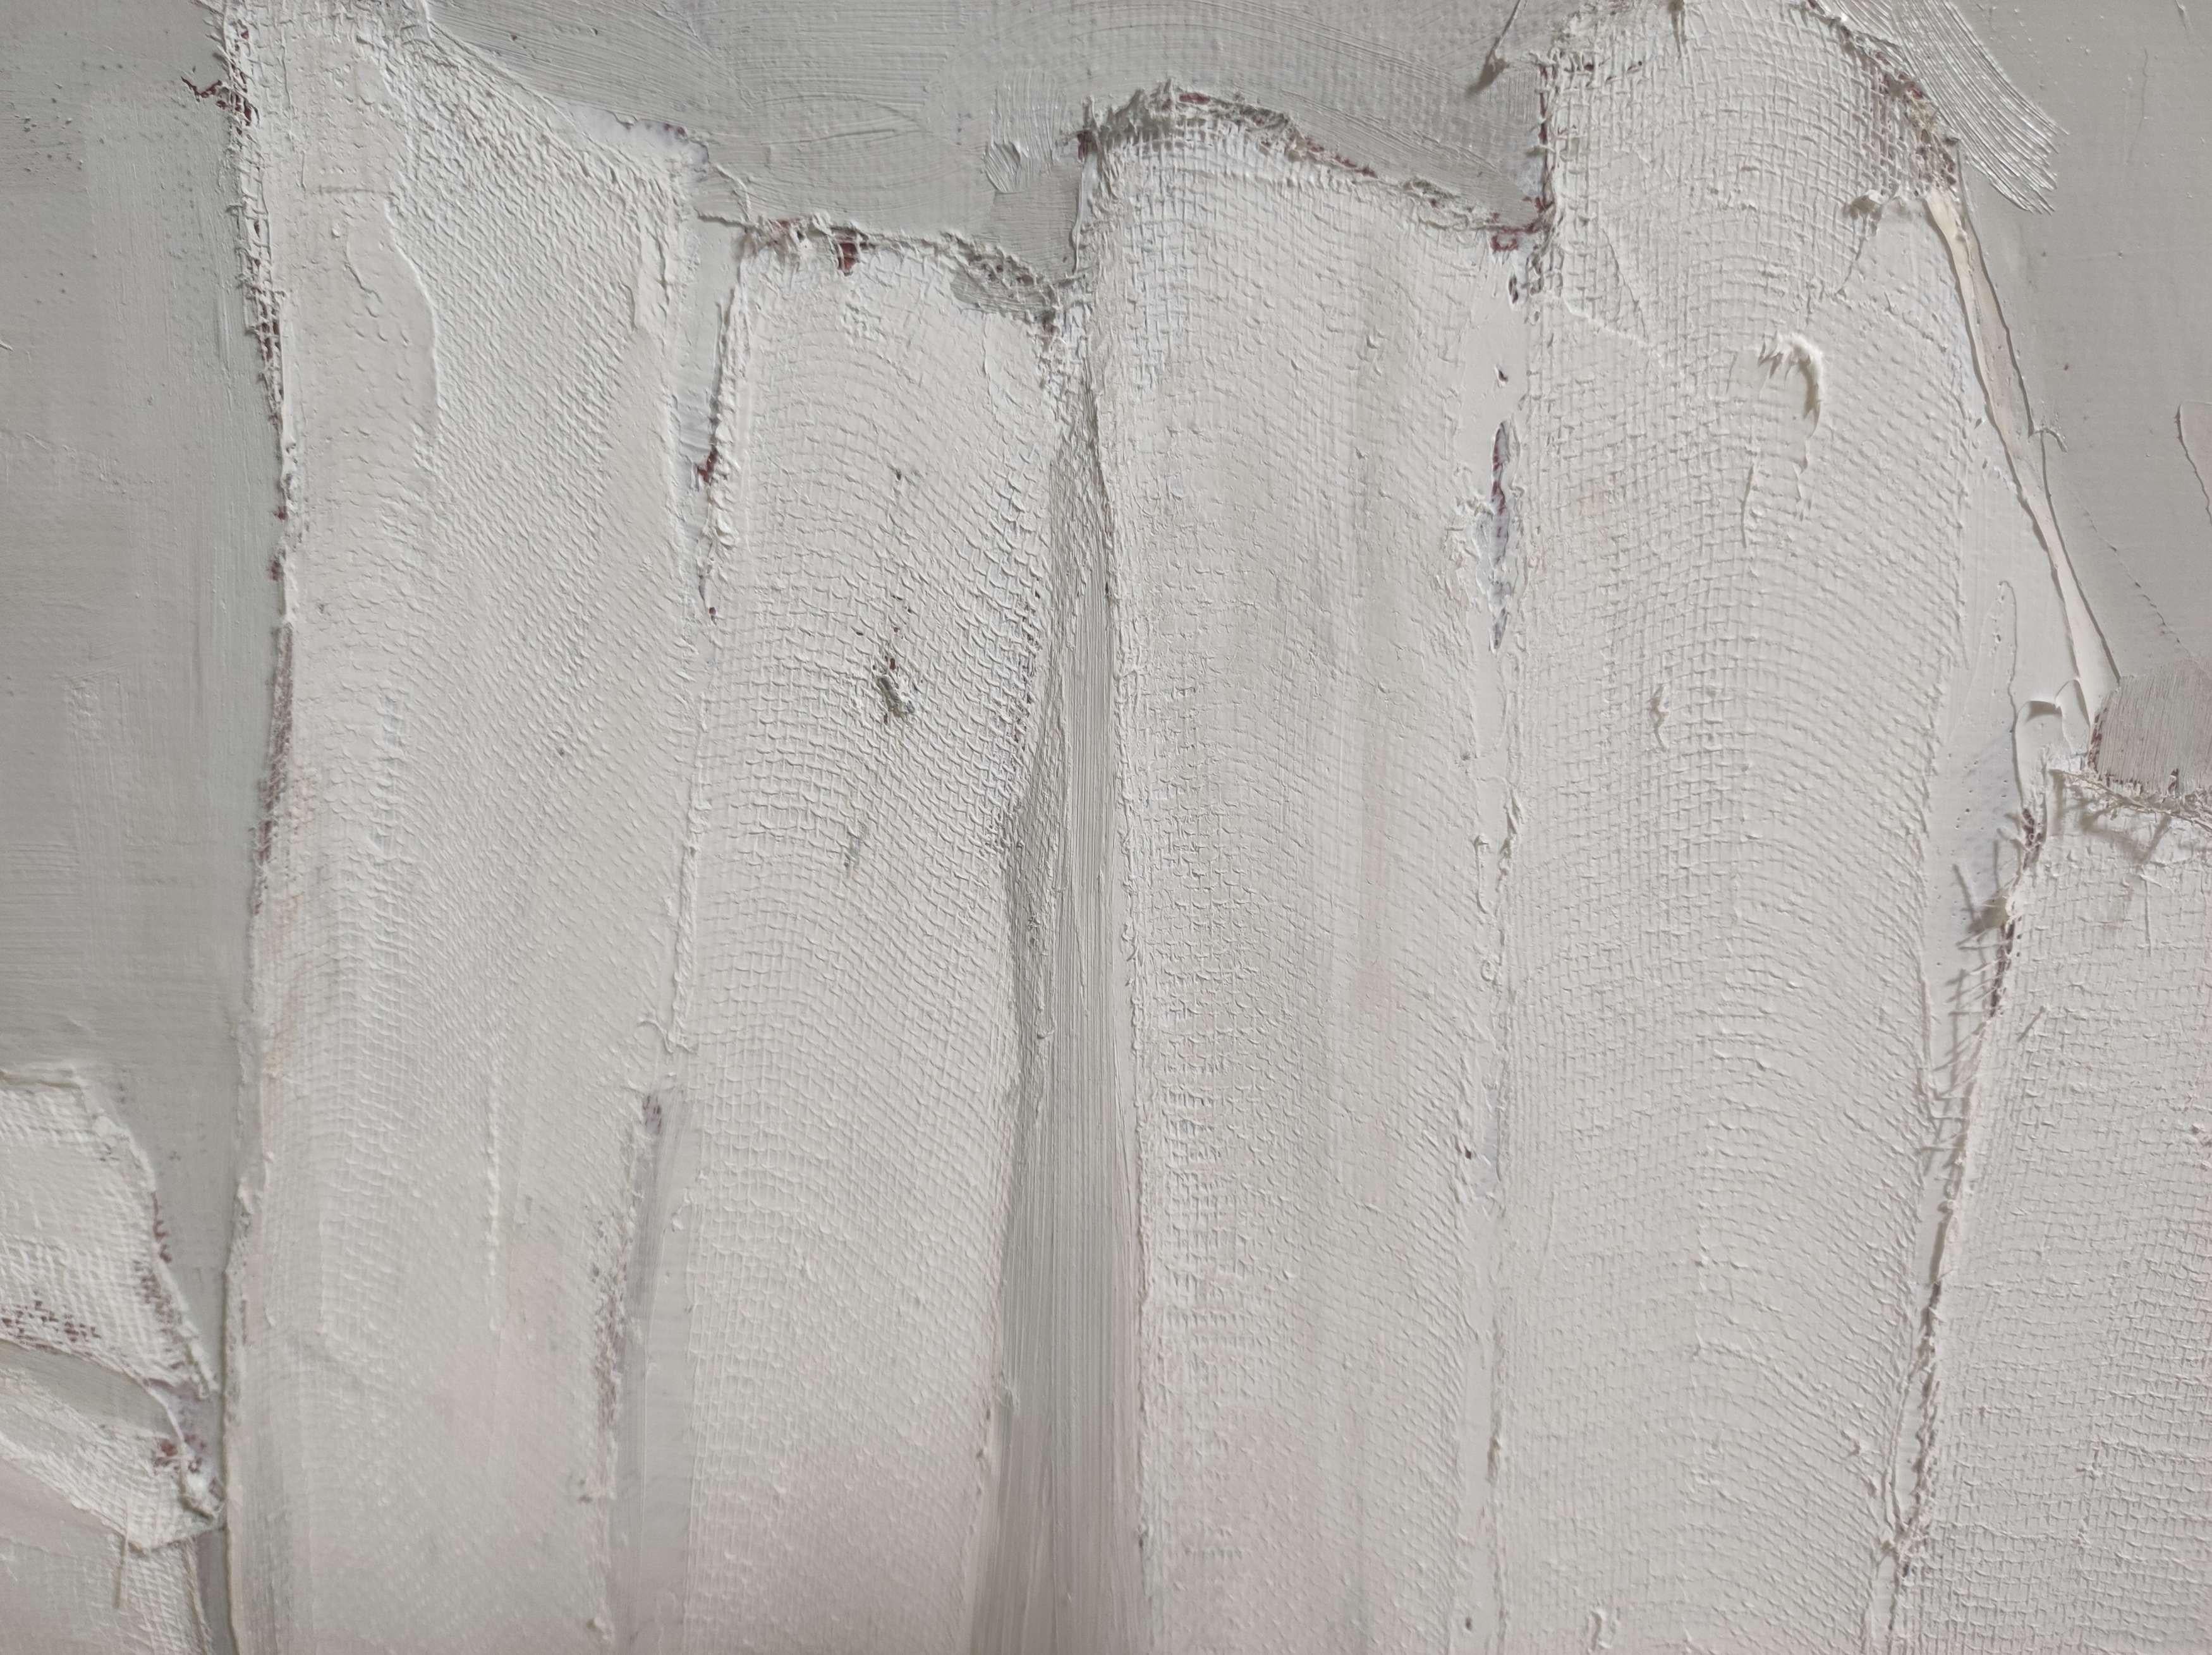 Academie, white abstract, monochrome, XXIe siècle,  minimalism, textured, books - Abstract Painting by SOPHIE DUMONT